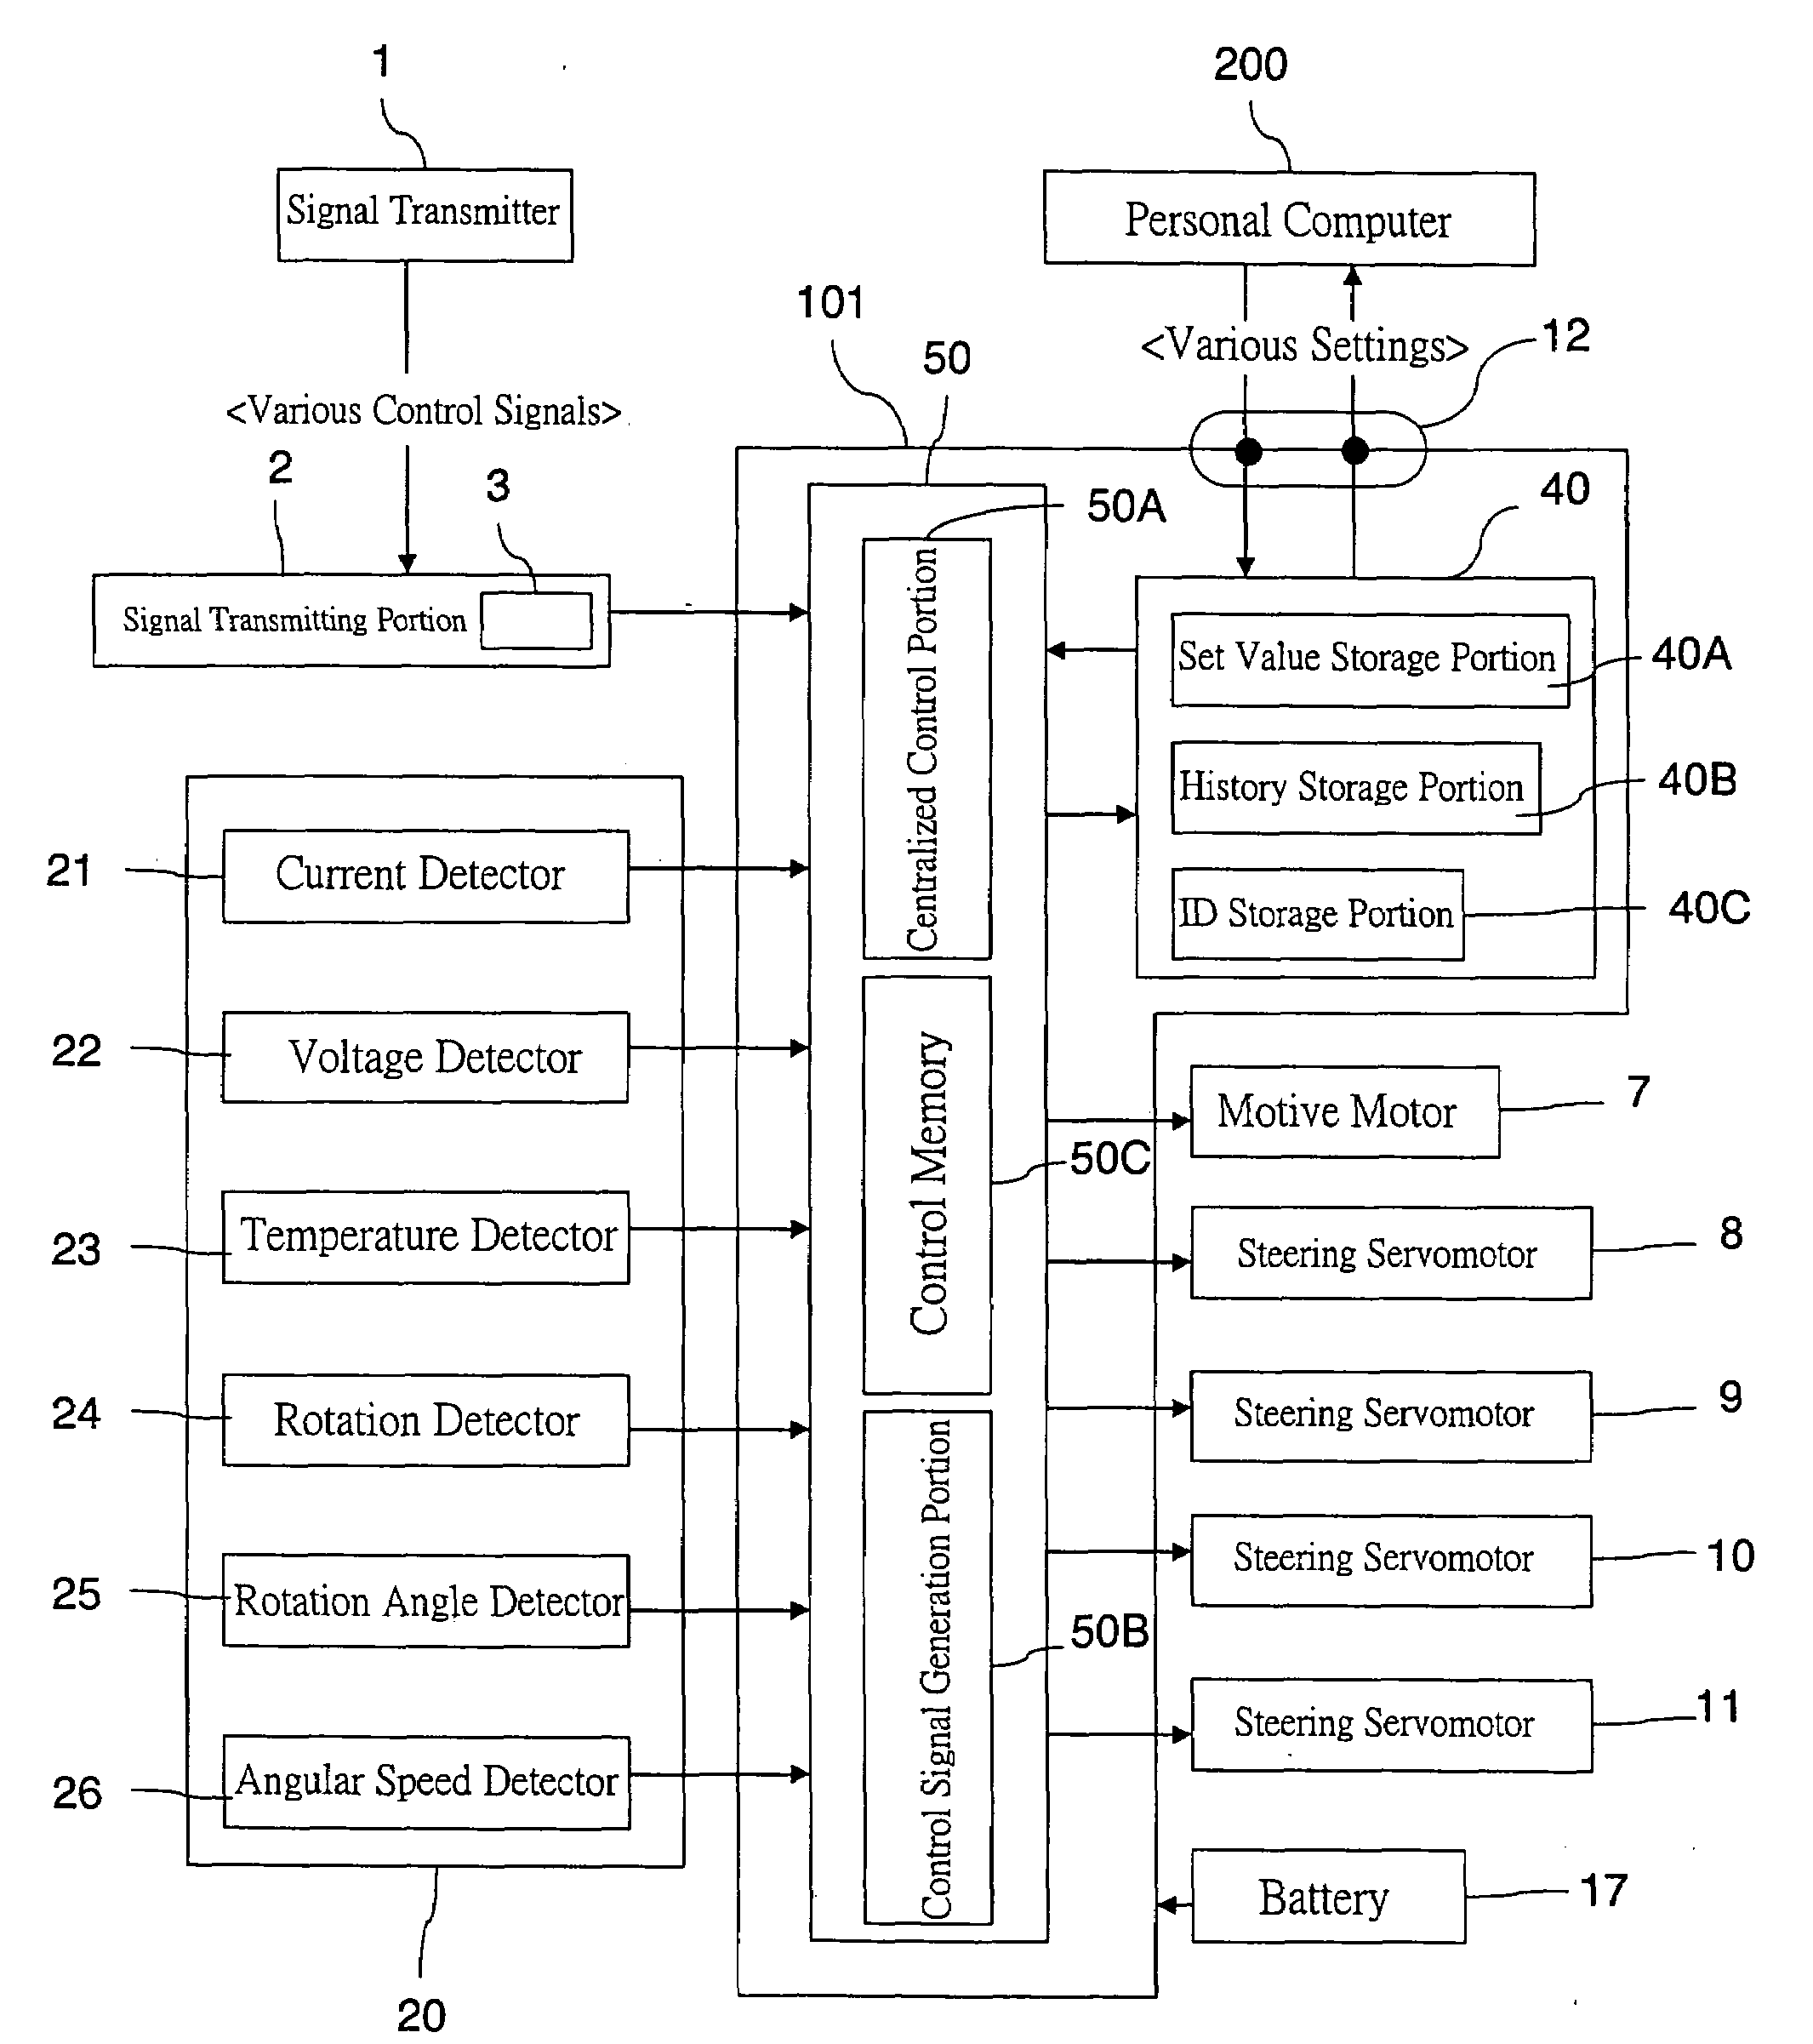 Central control system of wireless remote-control model